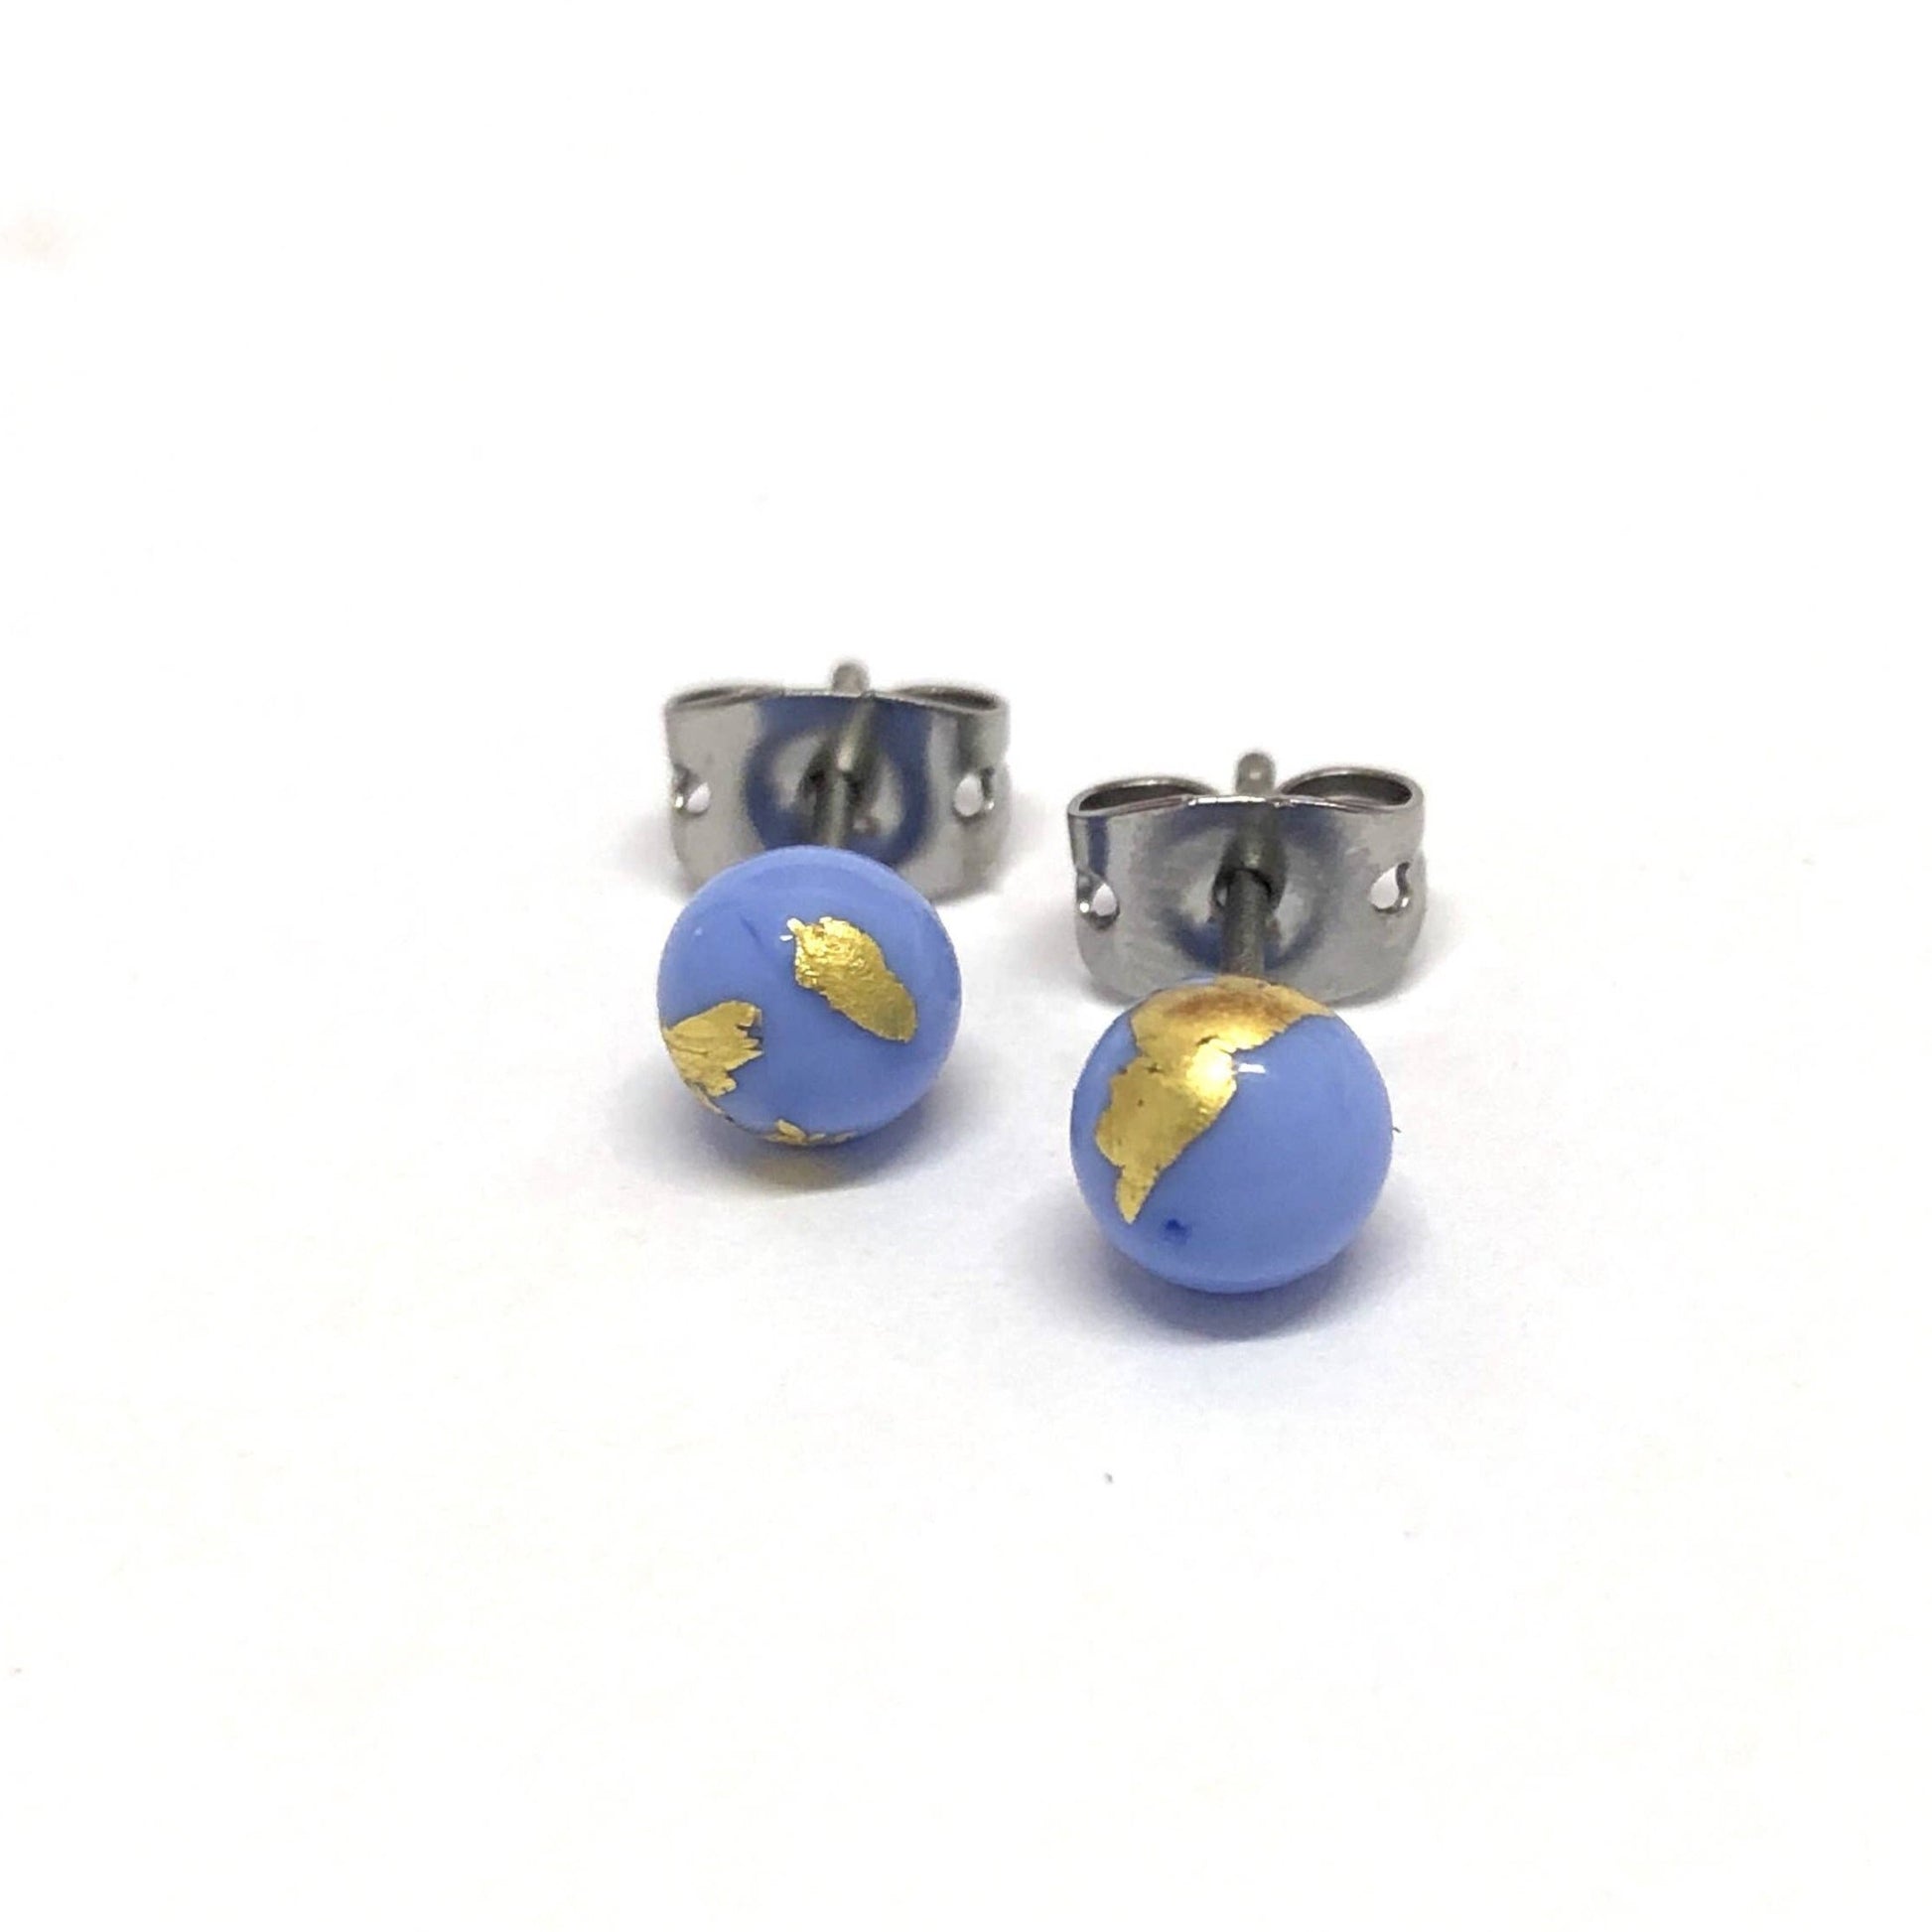 Periwinkle and Gold Handmade Glass Stud Earrings - The Little Jewellery Company